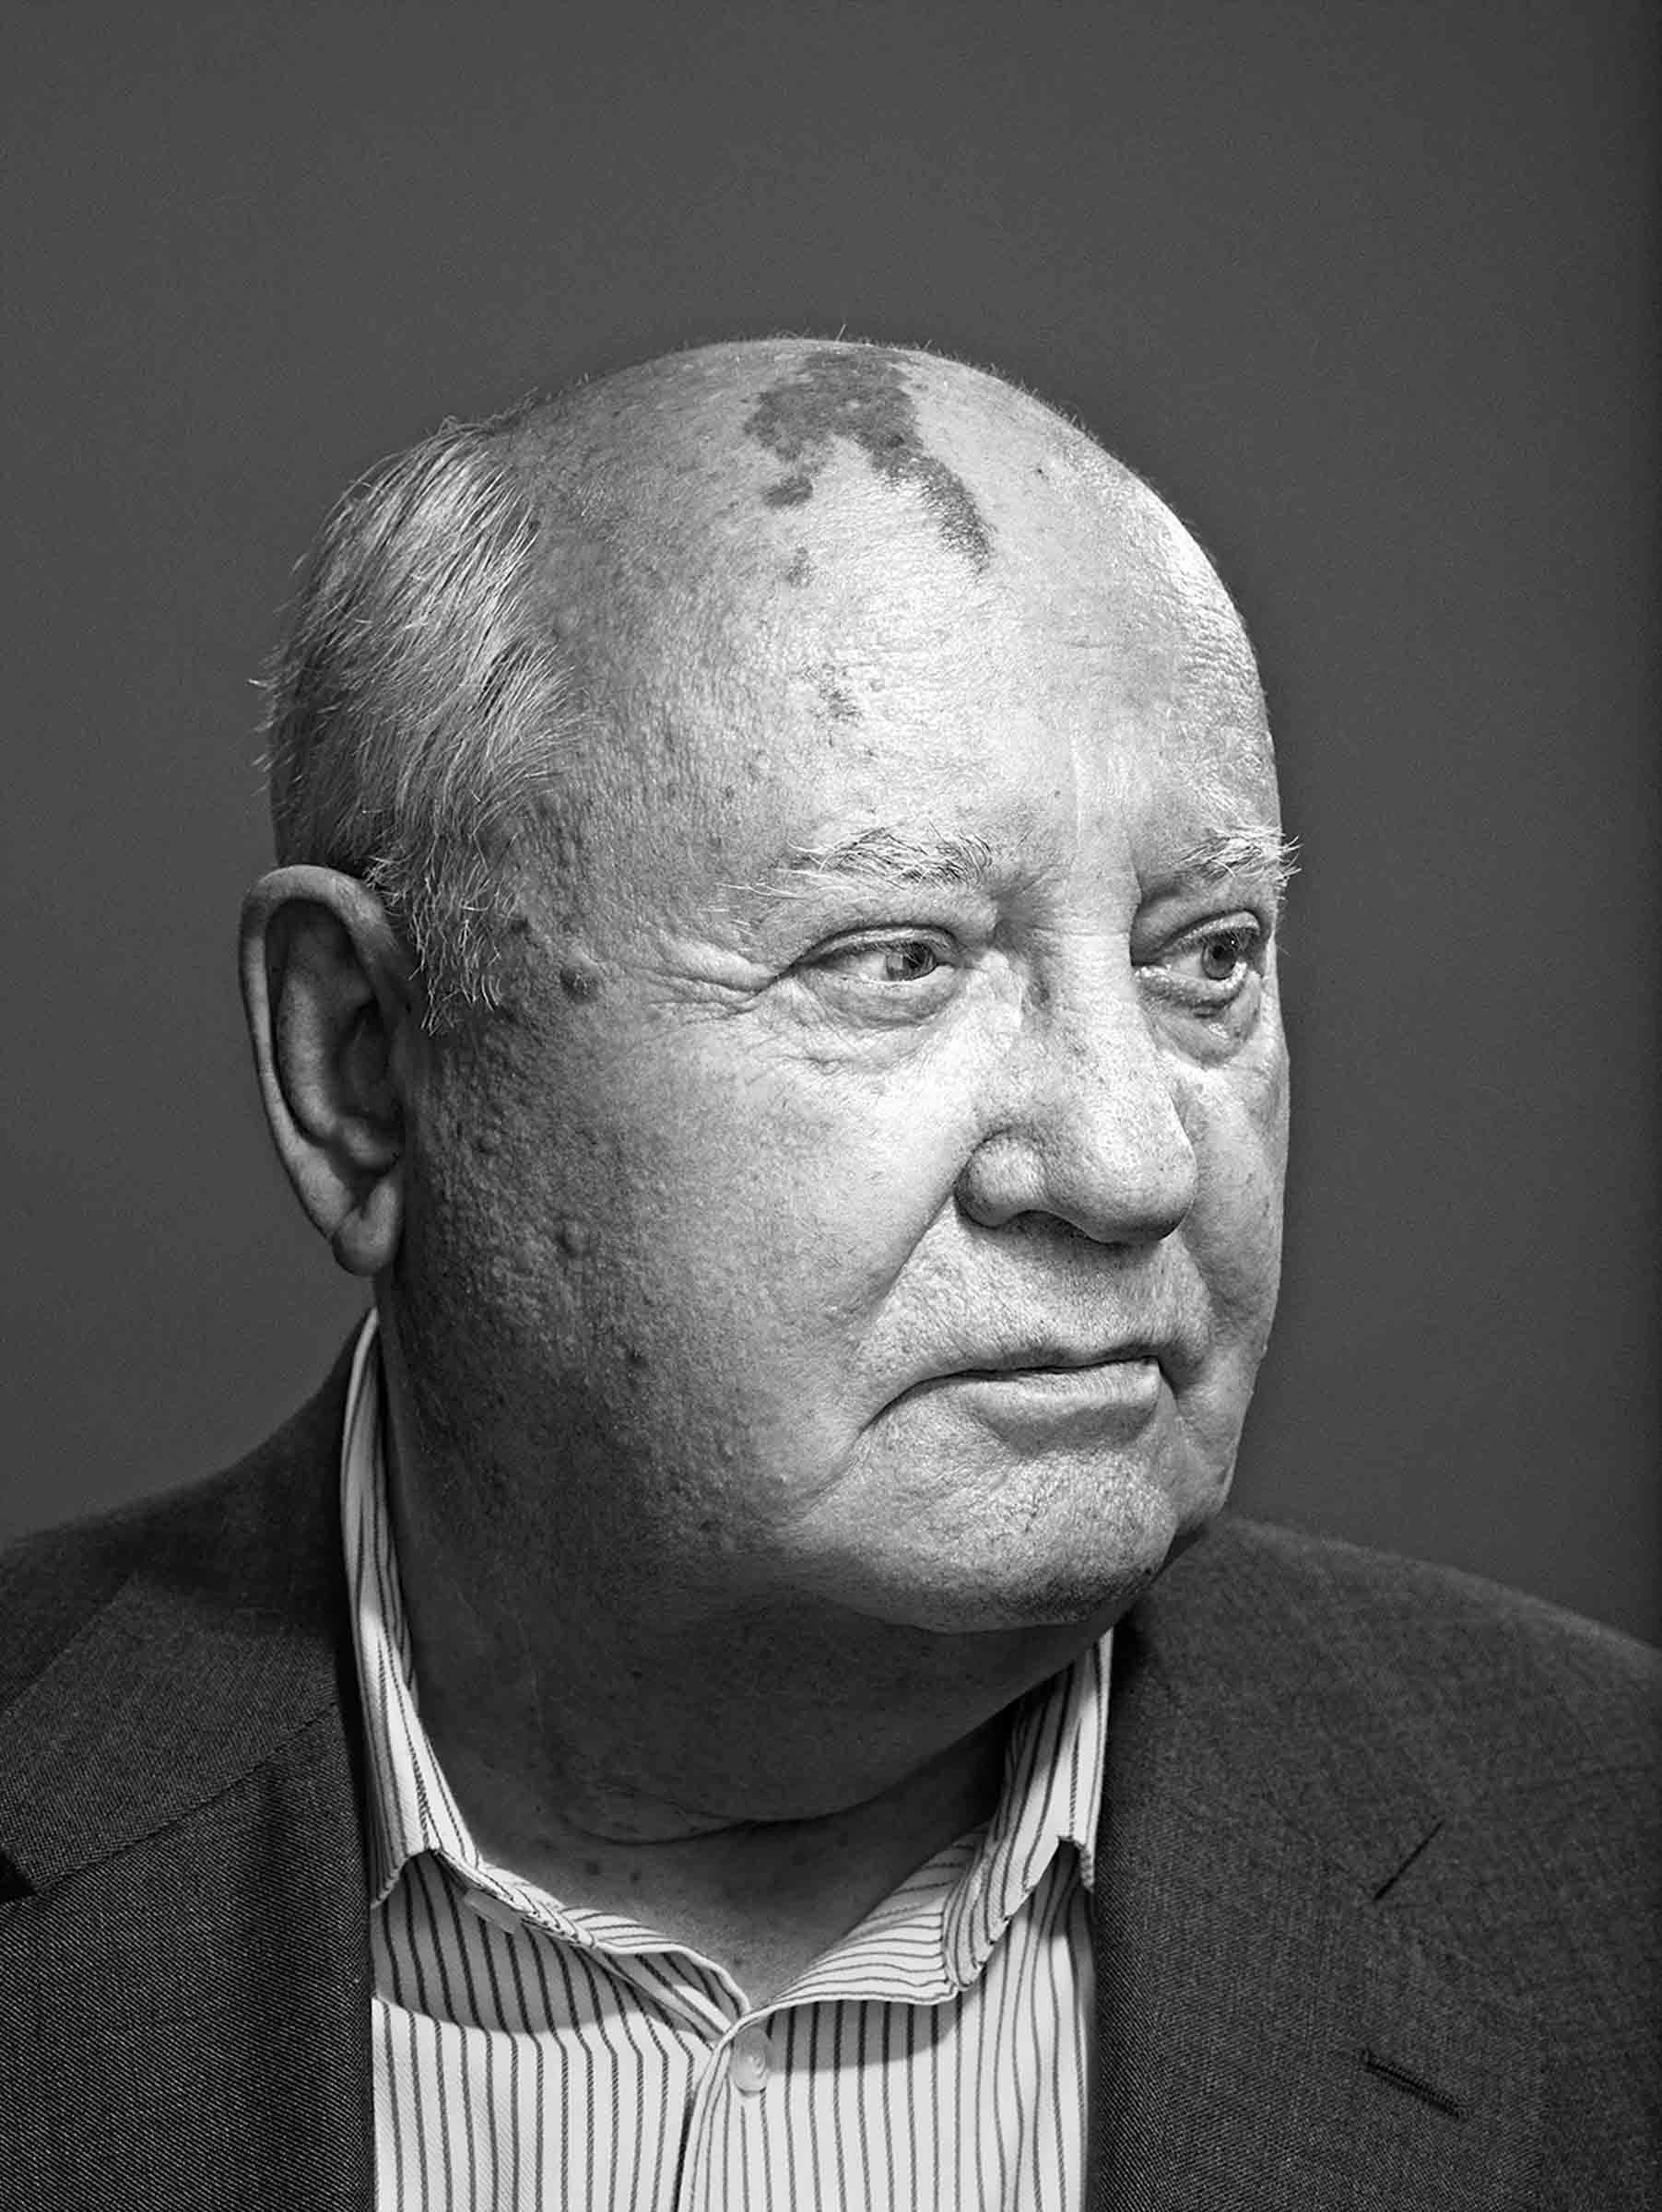 Throughout his presidency, Gorbachev promoted peaceful diplomacy, which led to the end of the Cold War (Martin Schoeller—AUGUST)